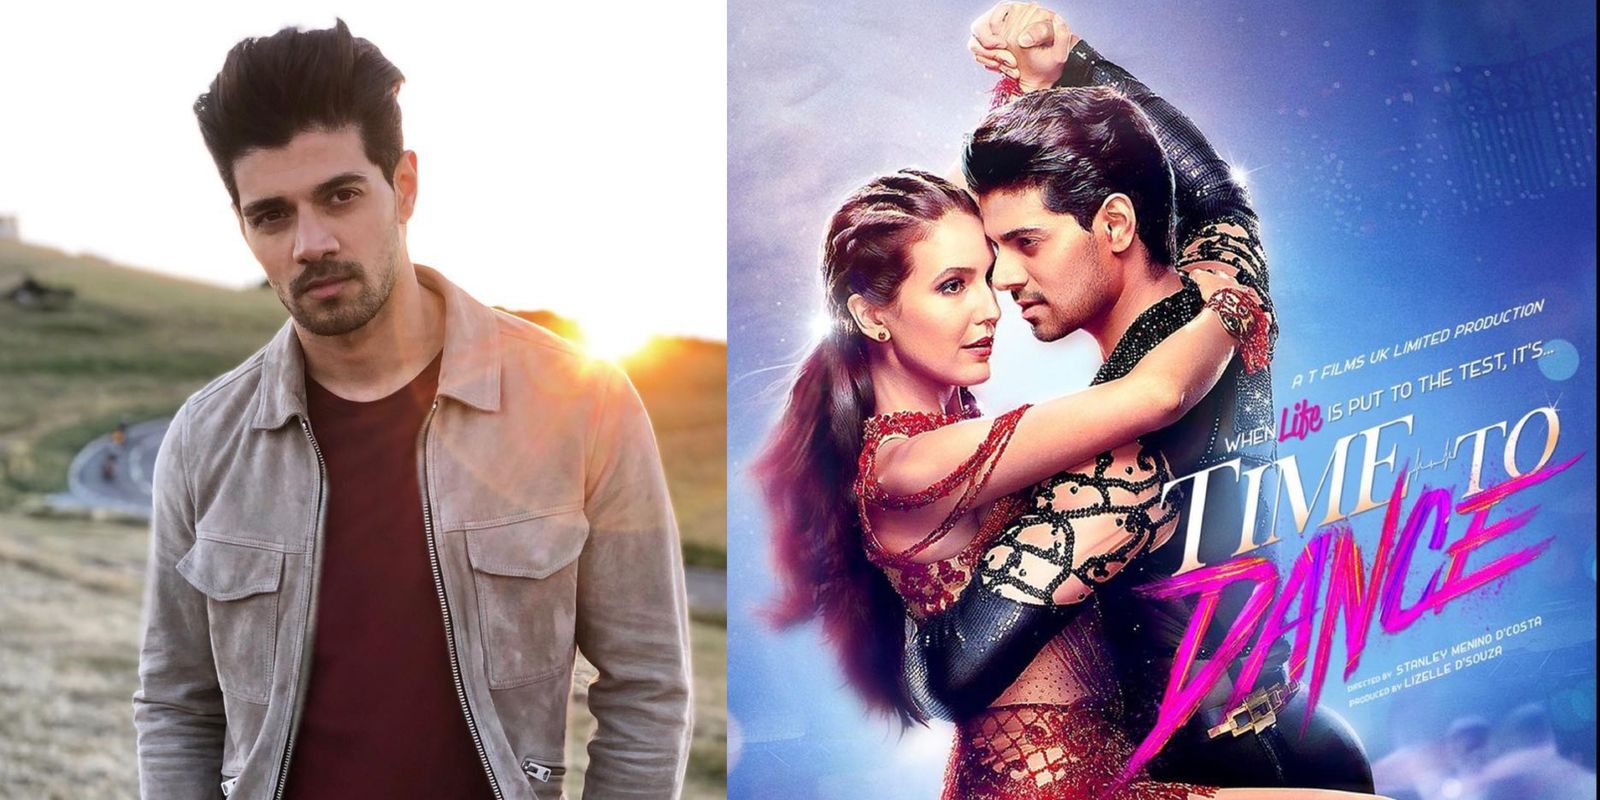 Time To Dance Actor Sooraj Pancholi Is Over The Jiah Khan Controversy; Opens Up About His Co-Star Isabelle Kaif